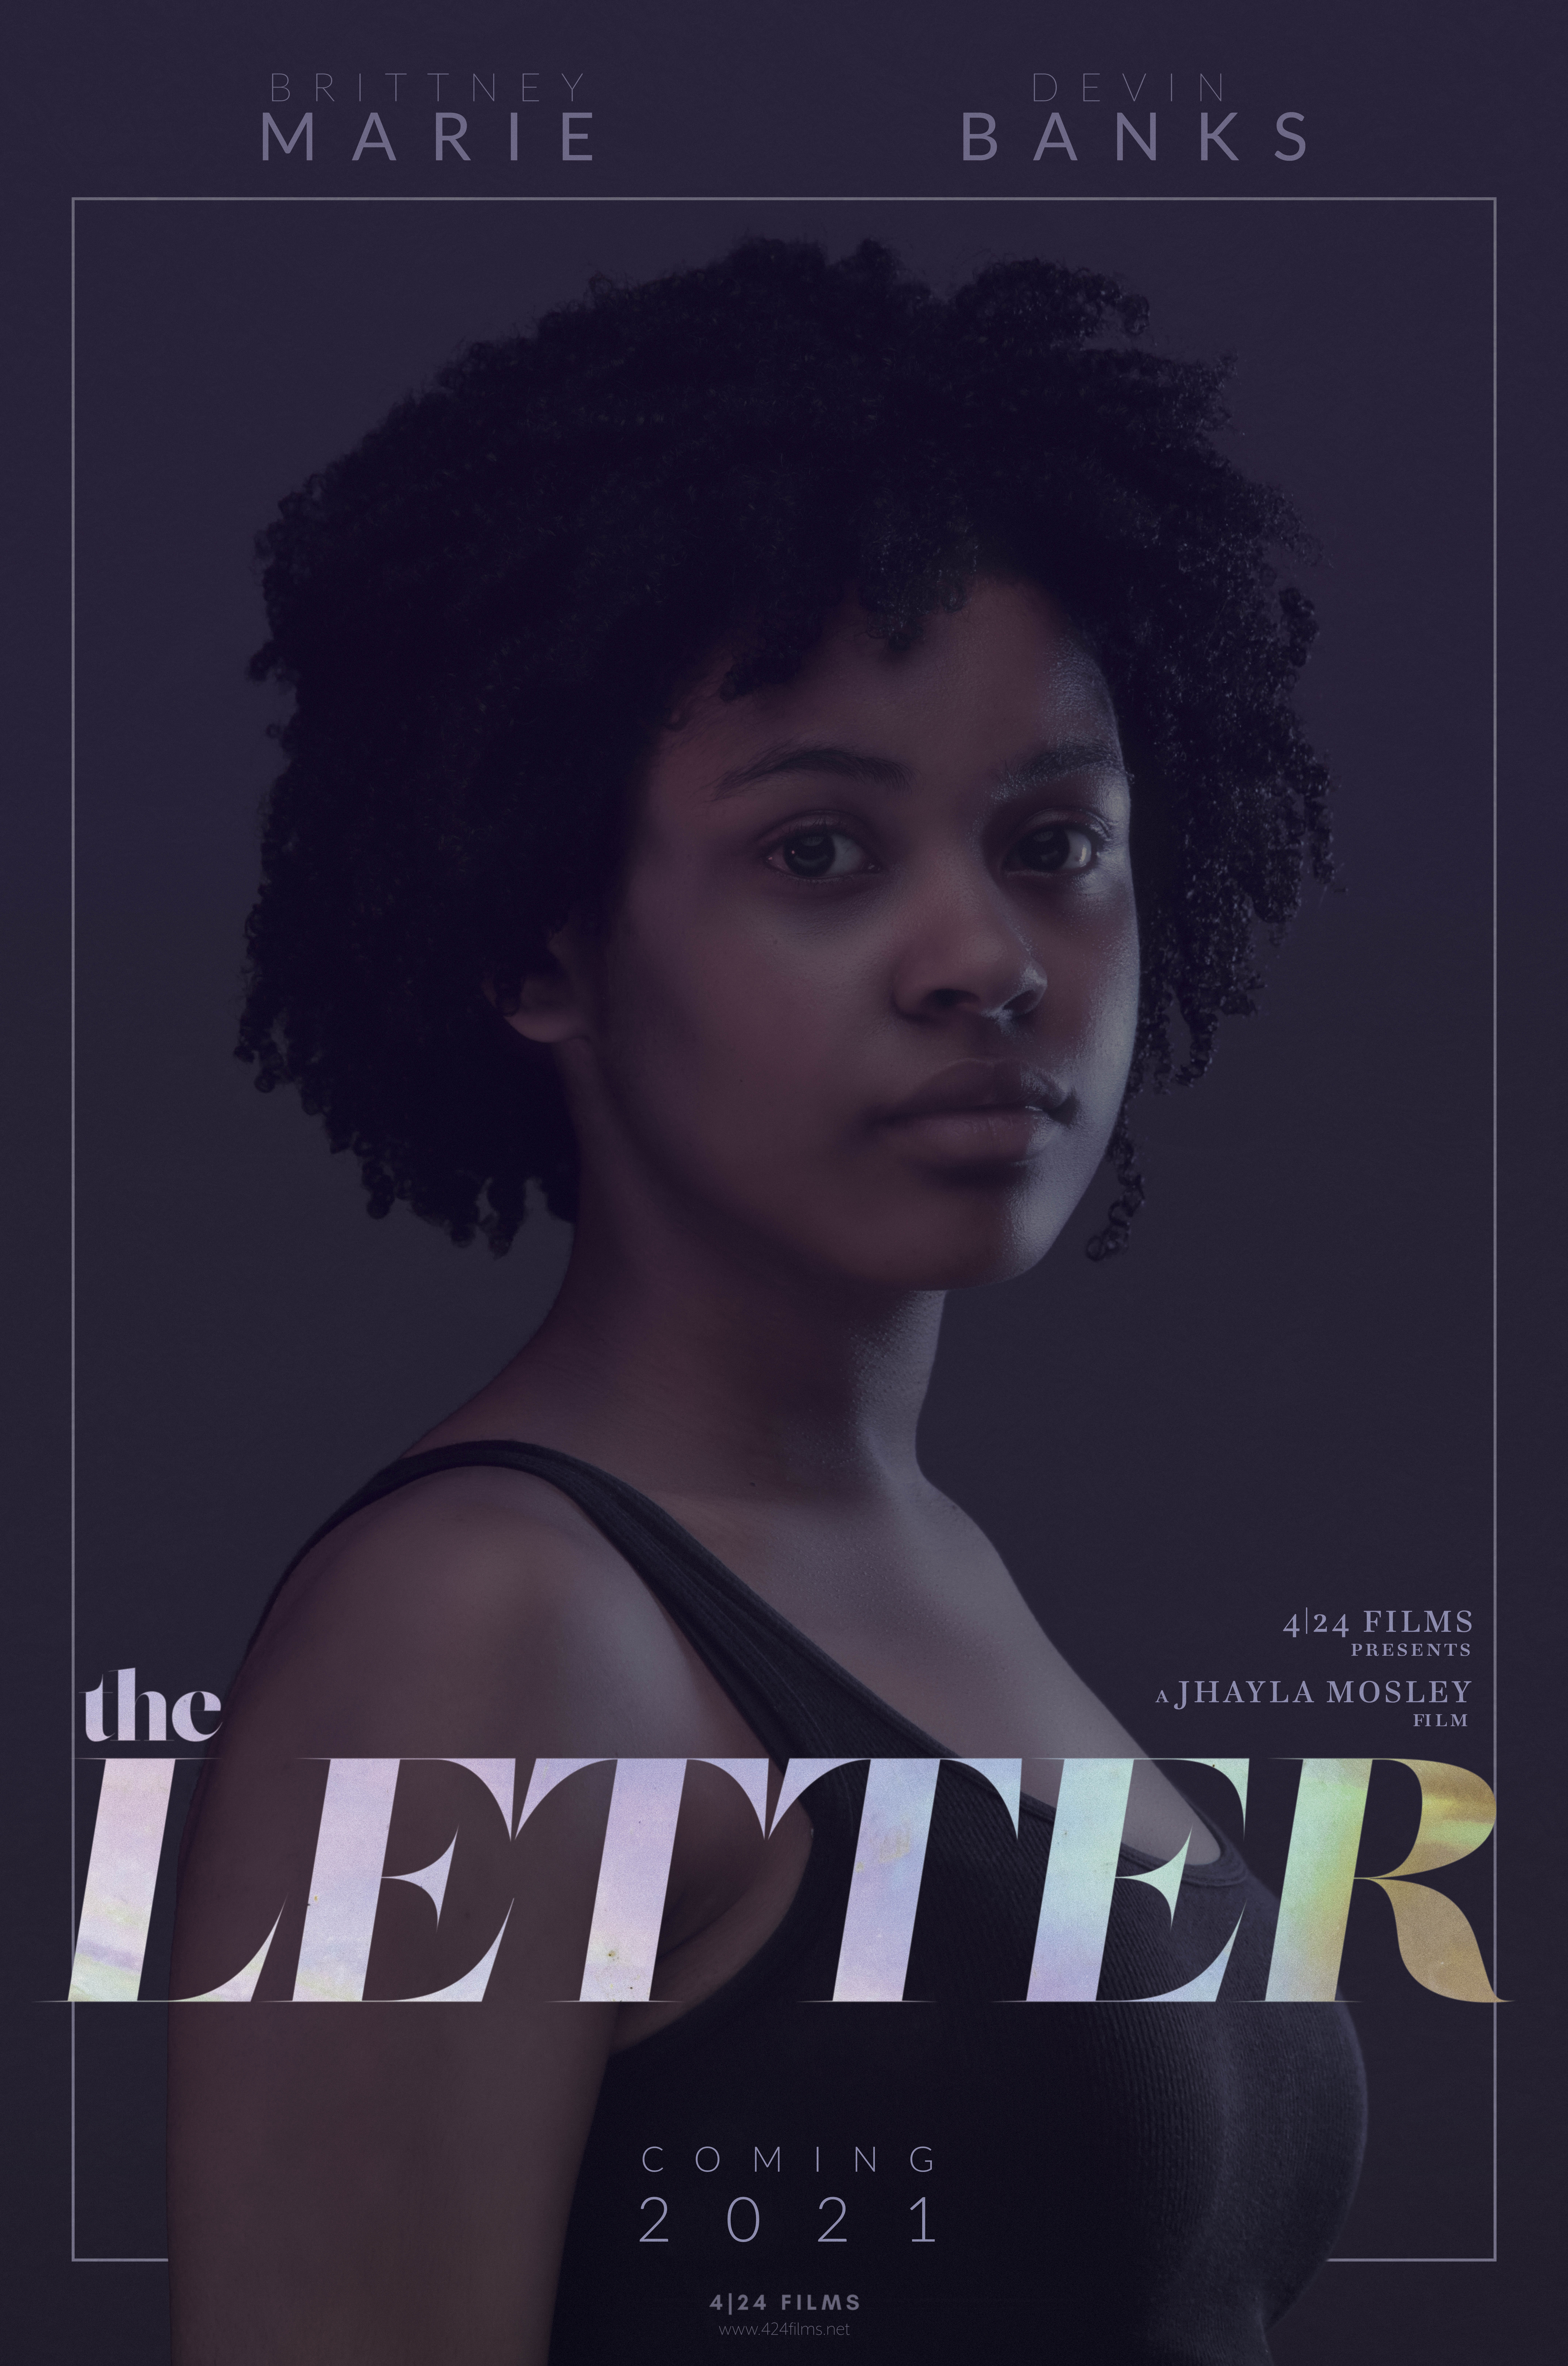 The Letter (2021)